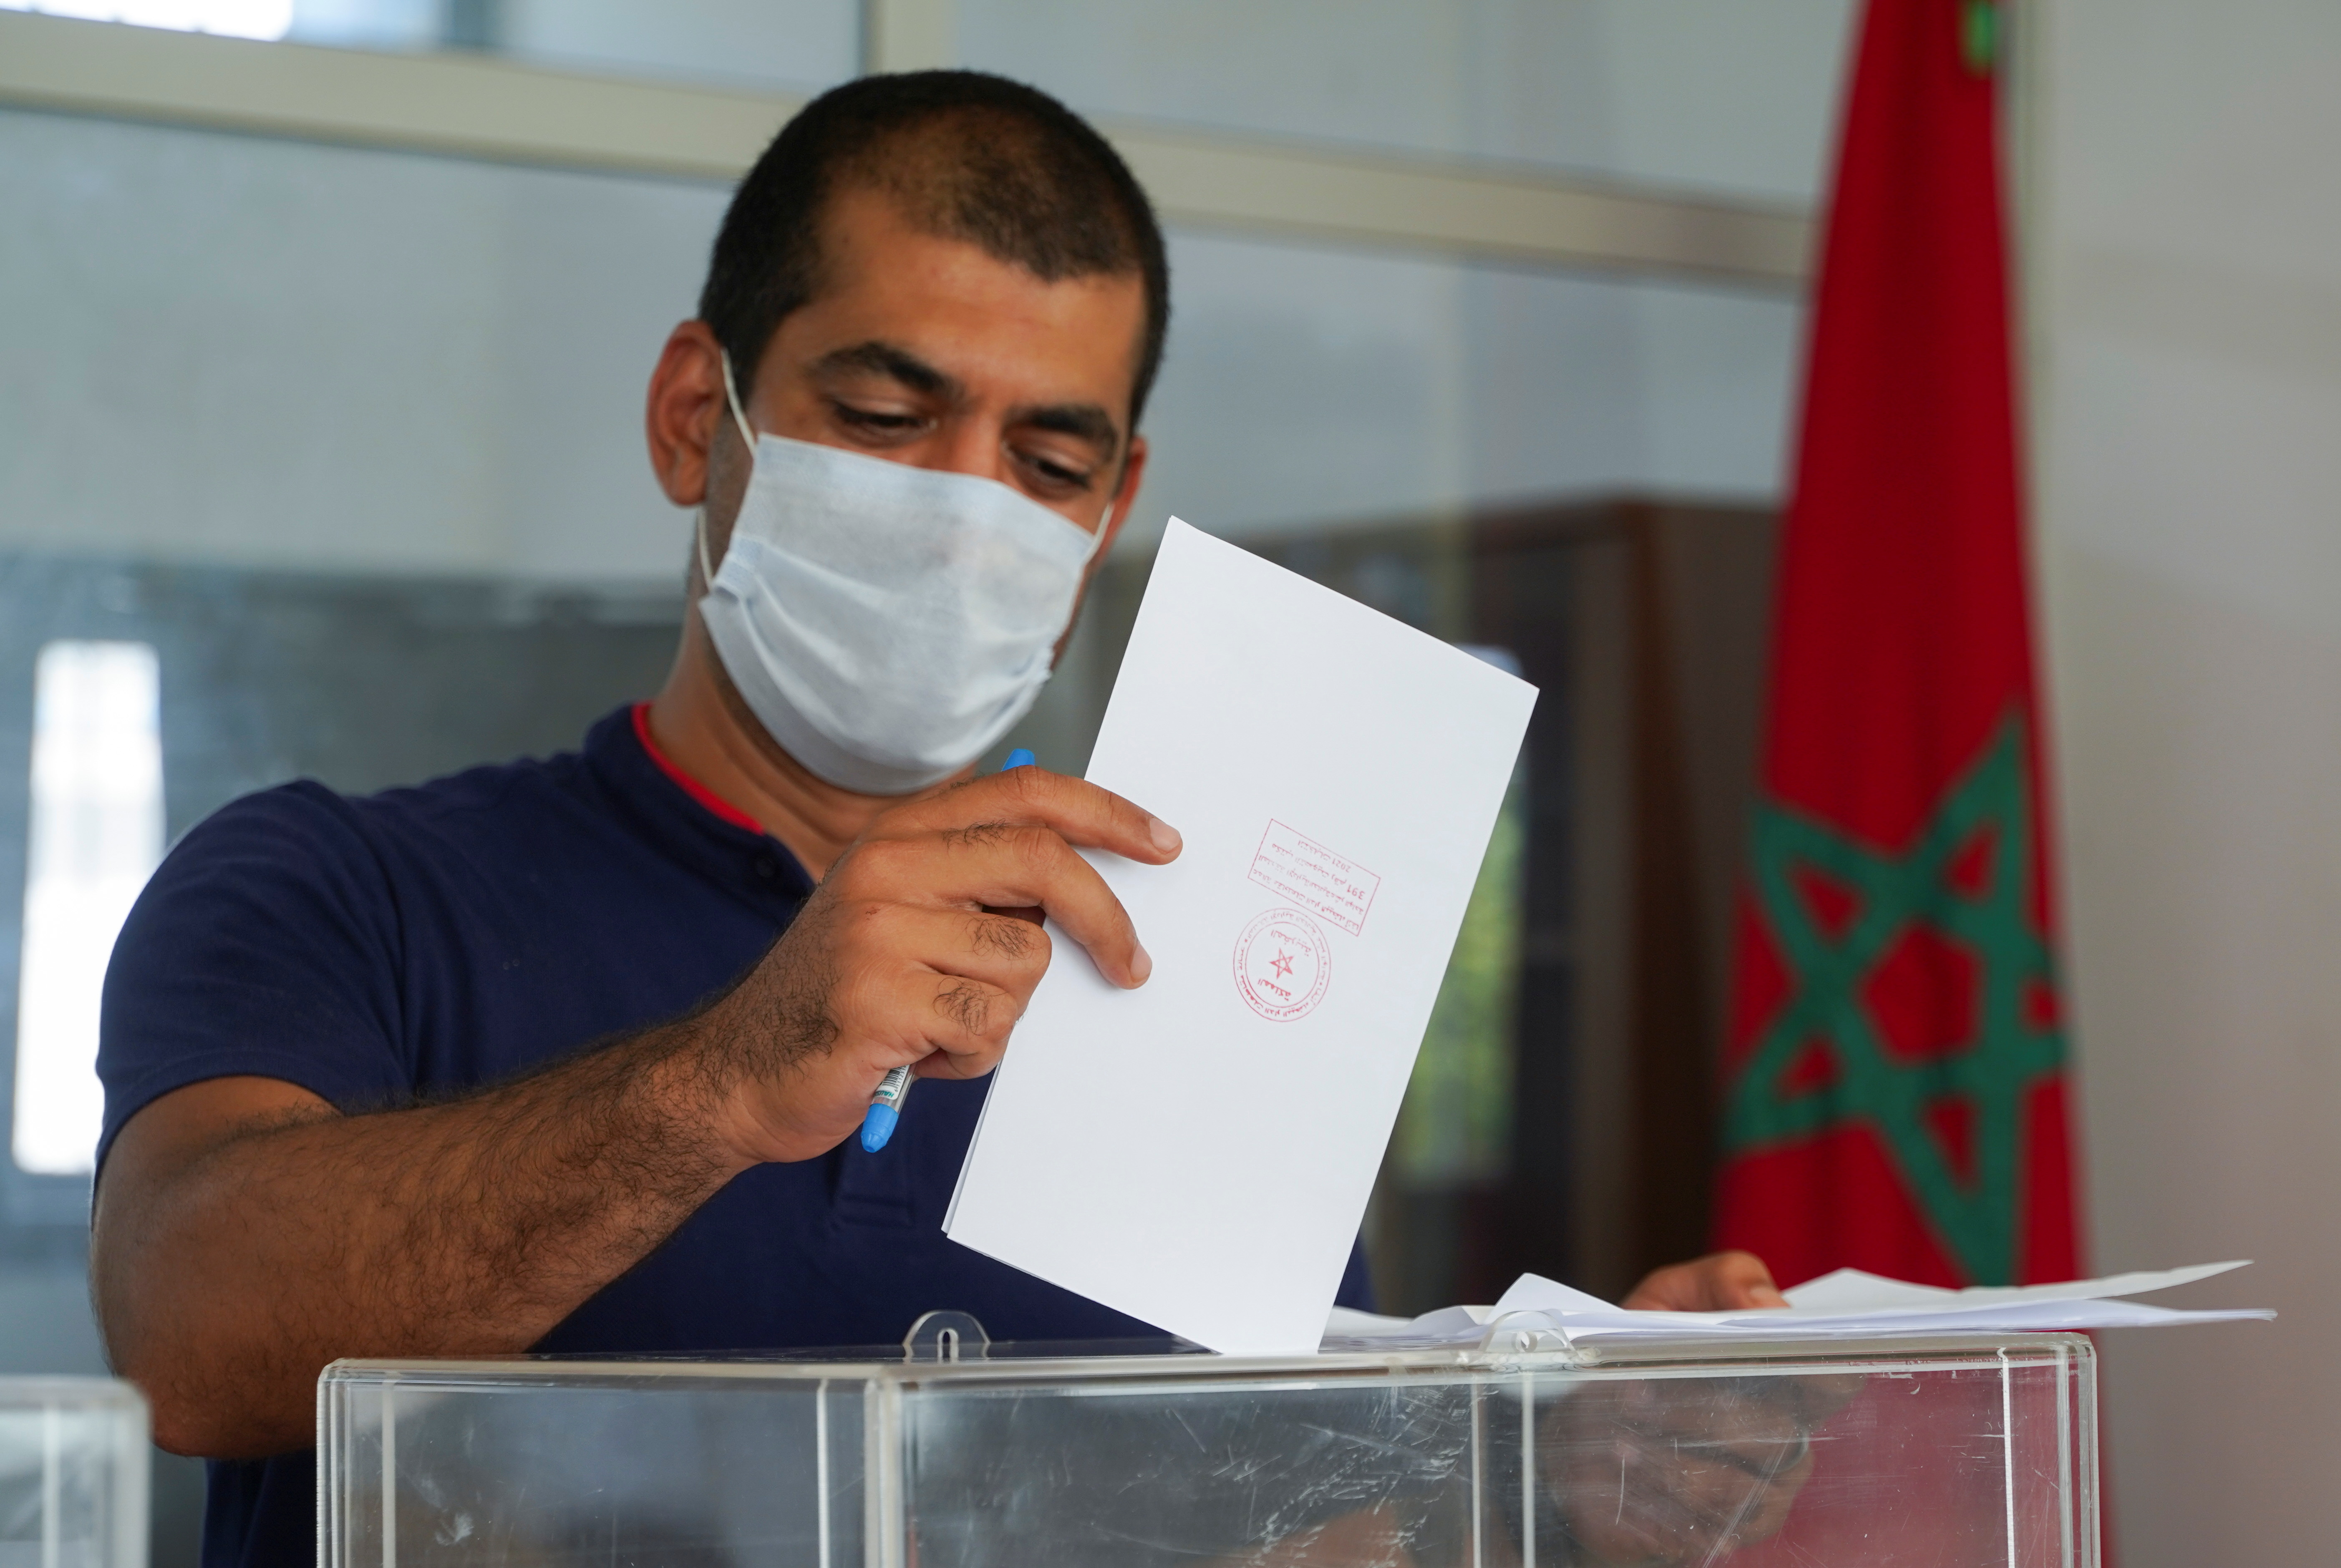 A man casts his vote at a polling station during parliamentary and local elections, in Casablanca